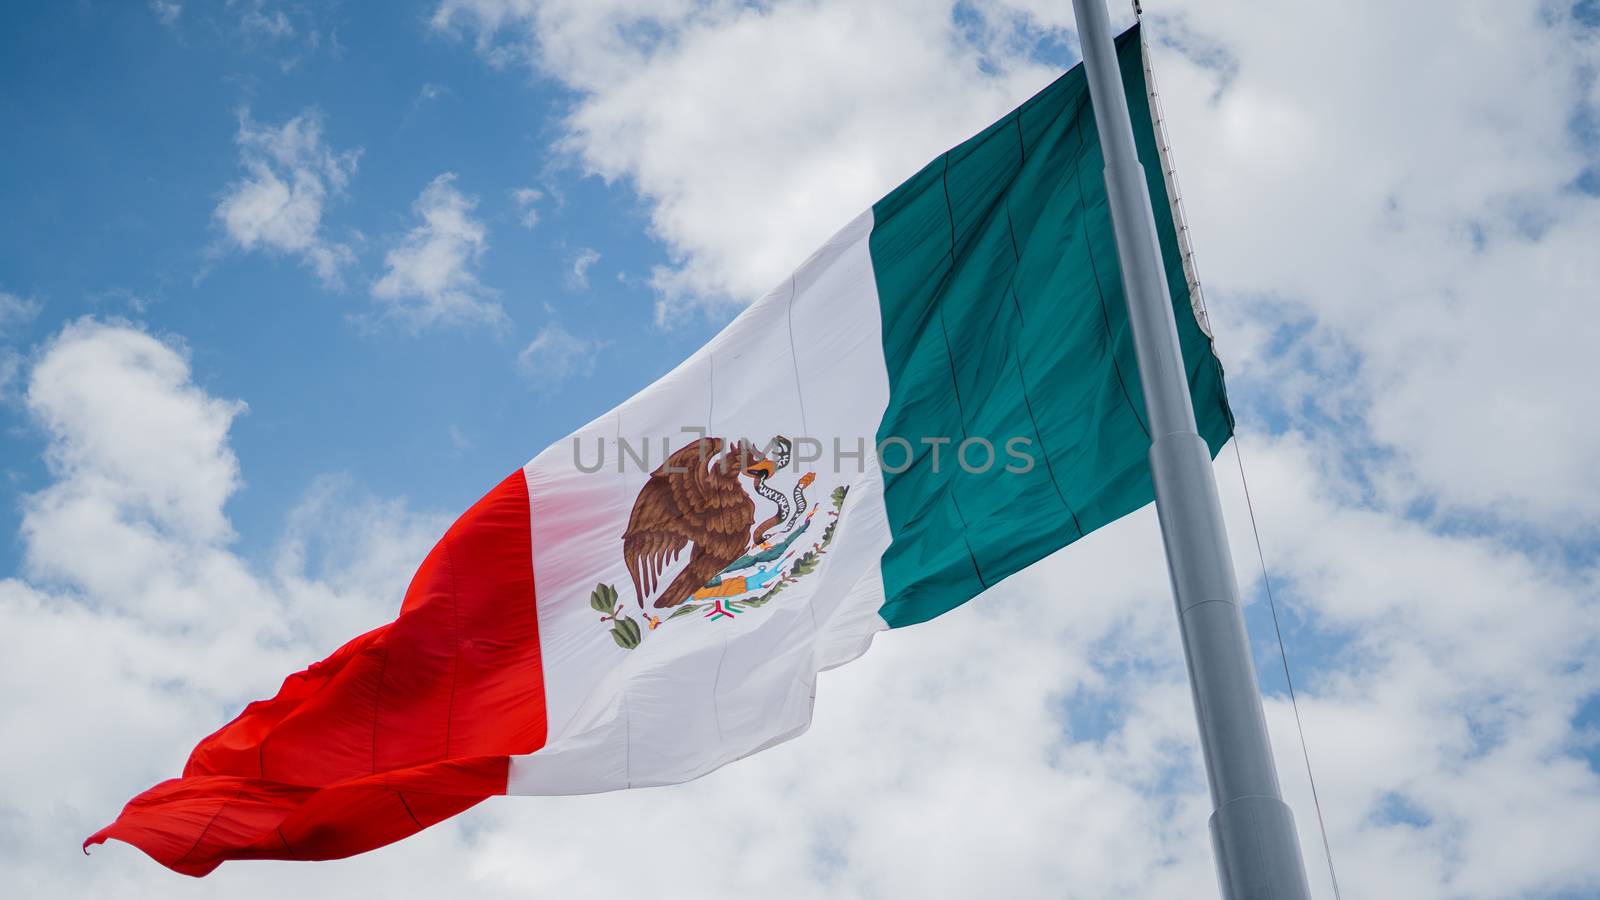 Picture of the Mexican Flag Waving in the Wind and a Slightly Cloudy Blue Sky as the Background